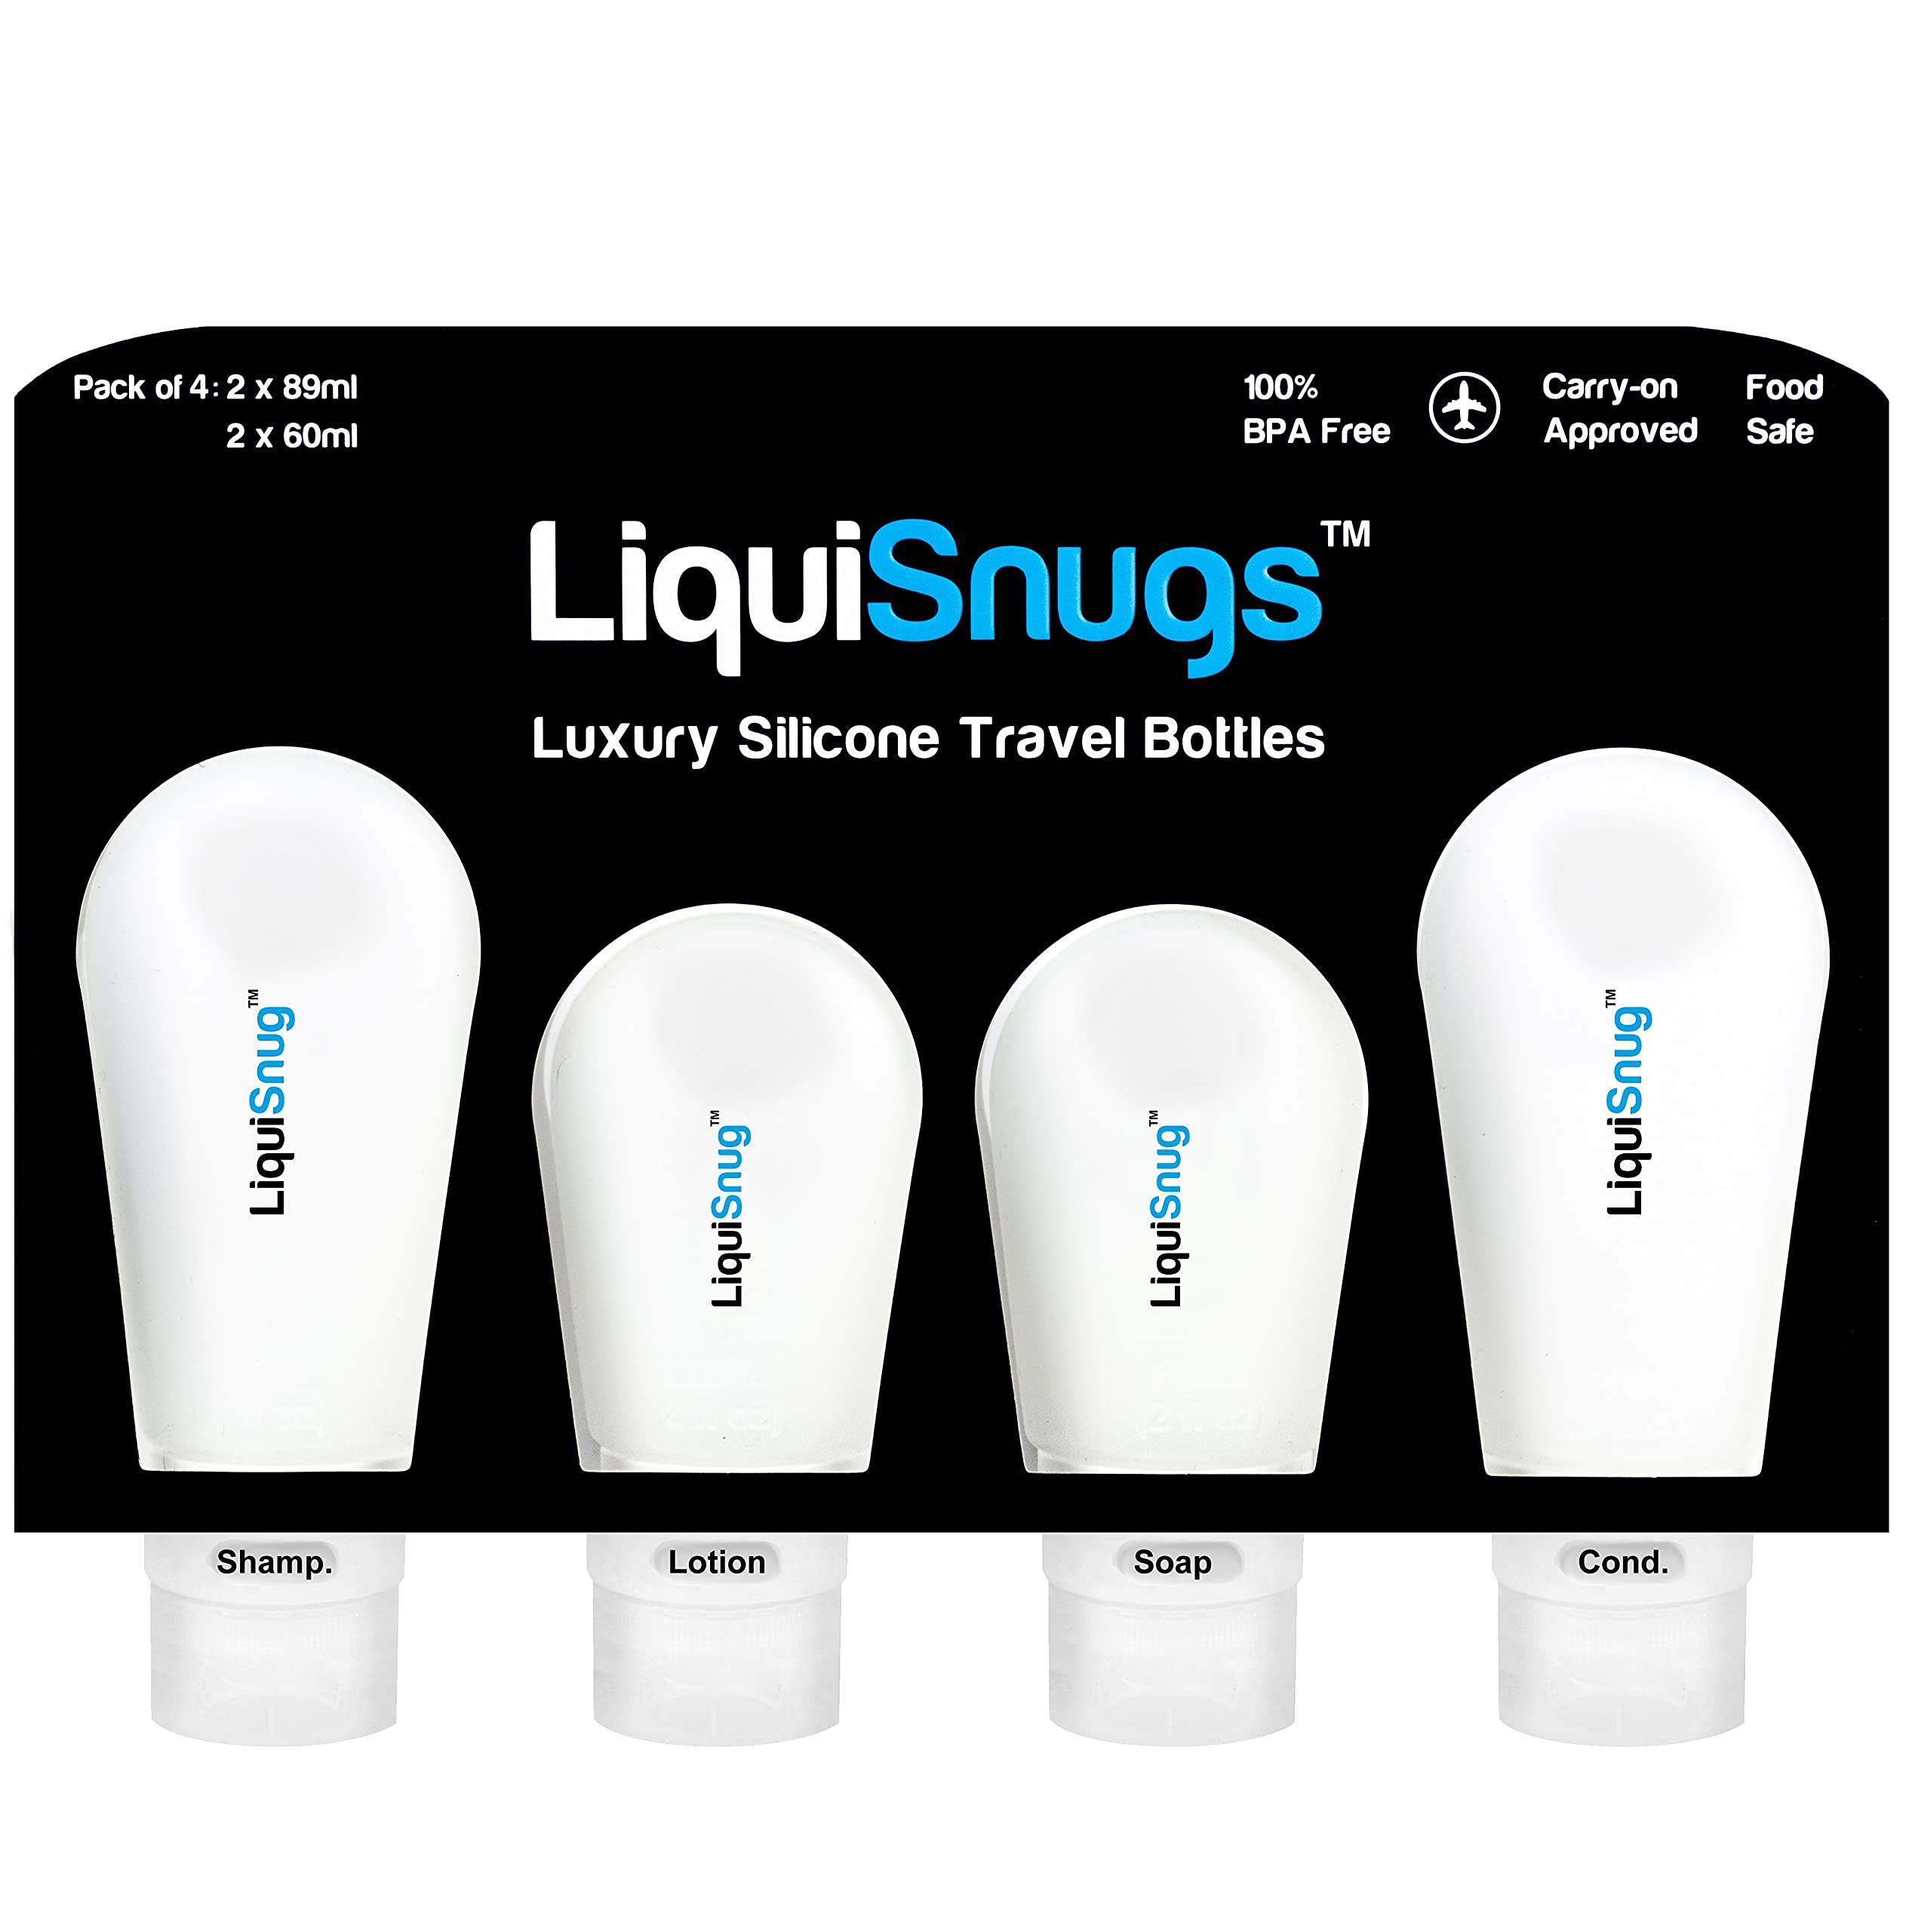 LiquiSnugs Premium - 100% Guaranteed Leak Proof Silicone Travel Bottles For Toiletries - TSA Approved Container. Premium Range Travel Shampoo Bottles with Suction Cups and Adjustable Labels